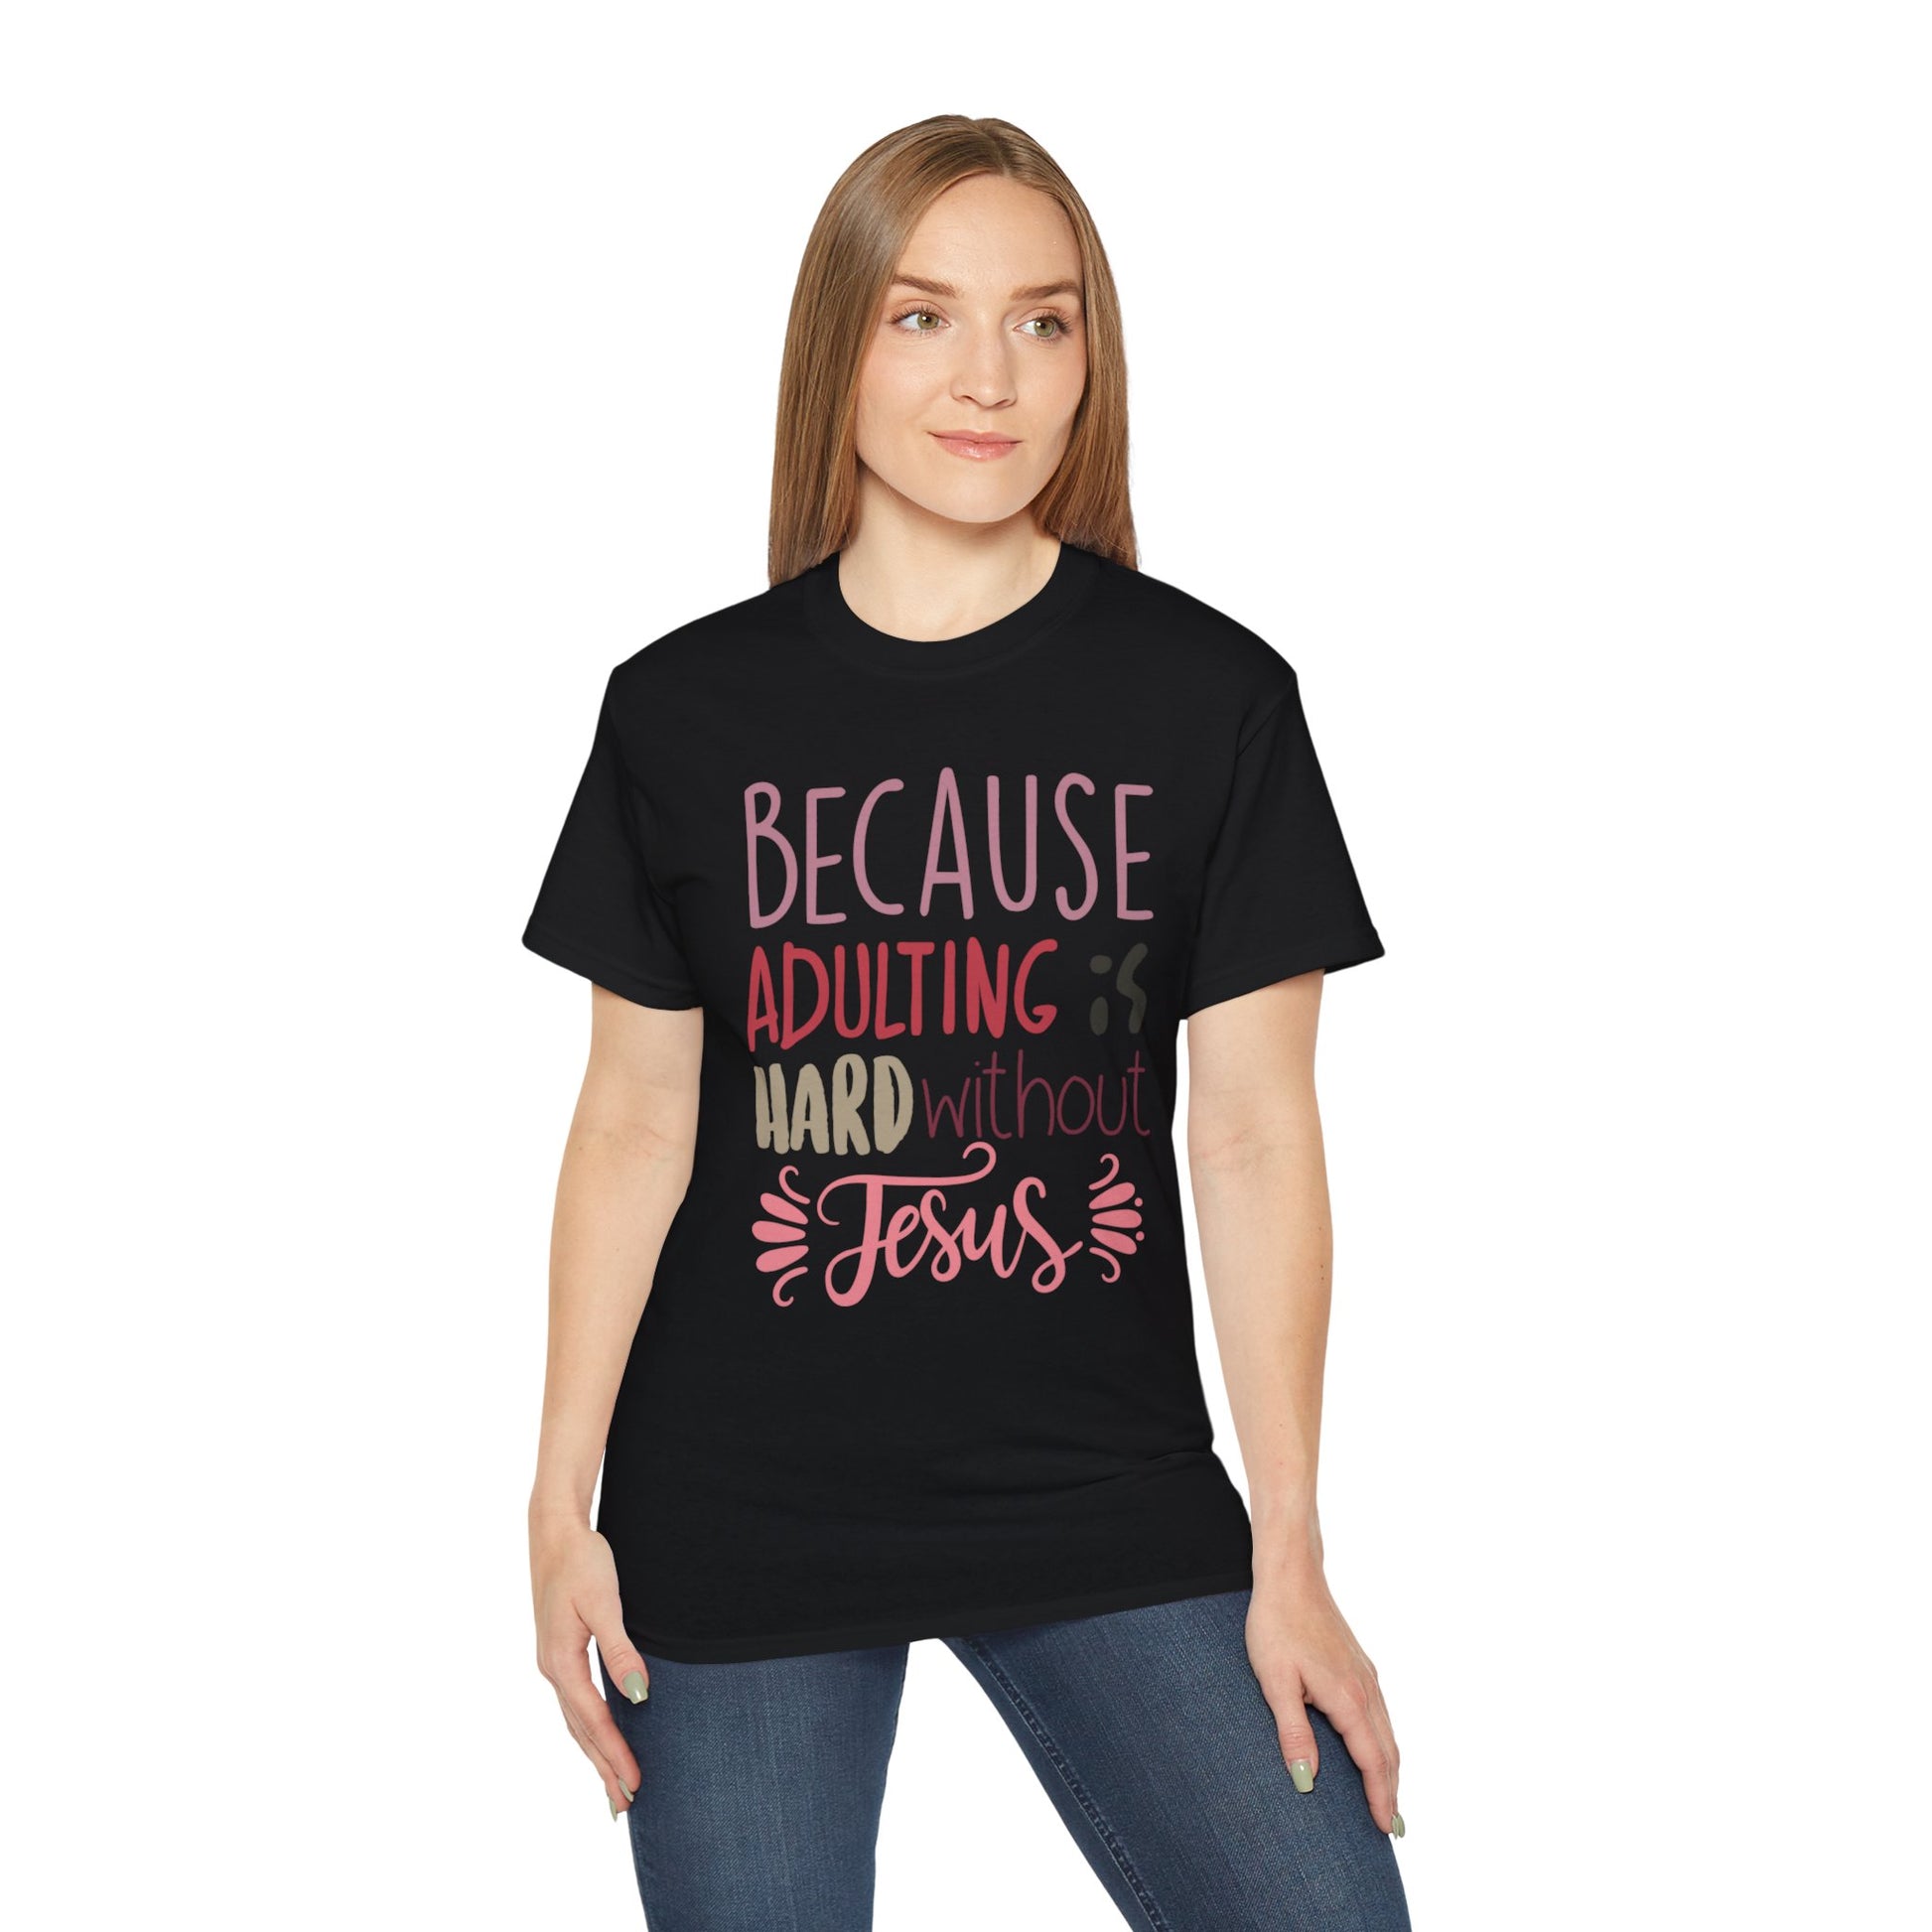 woman in black shirt with words "Because Adulting is Hard without Jesus"